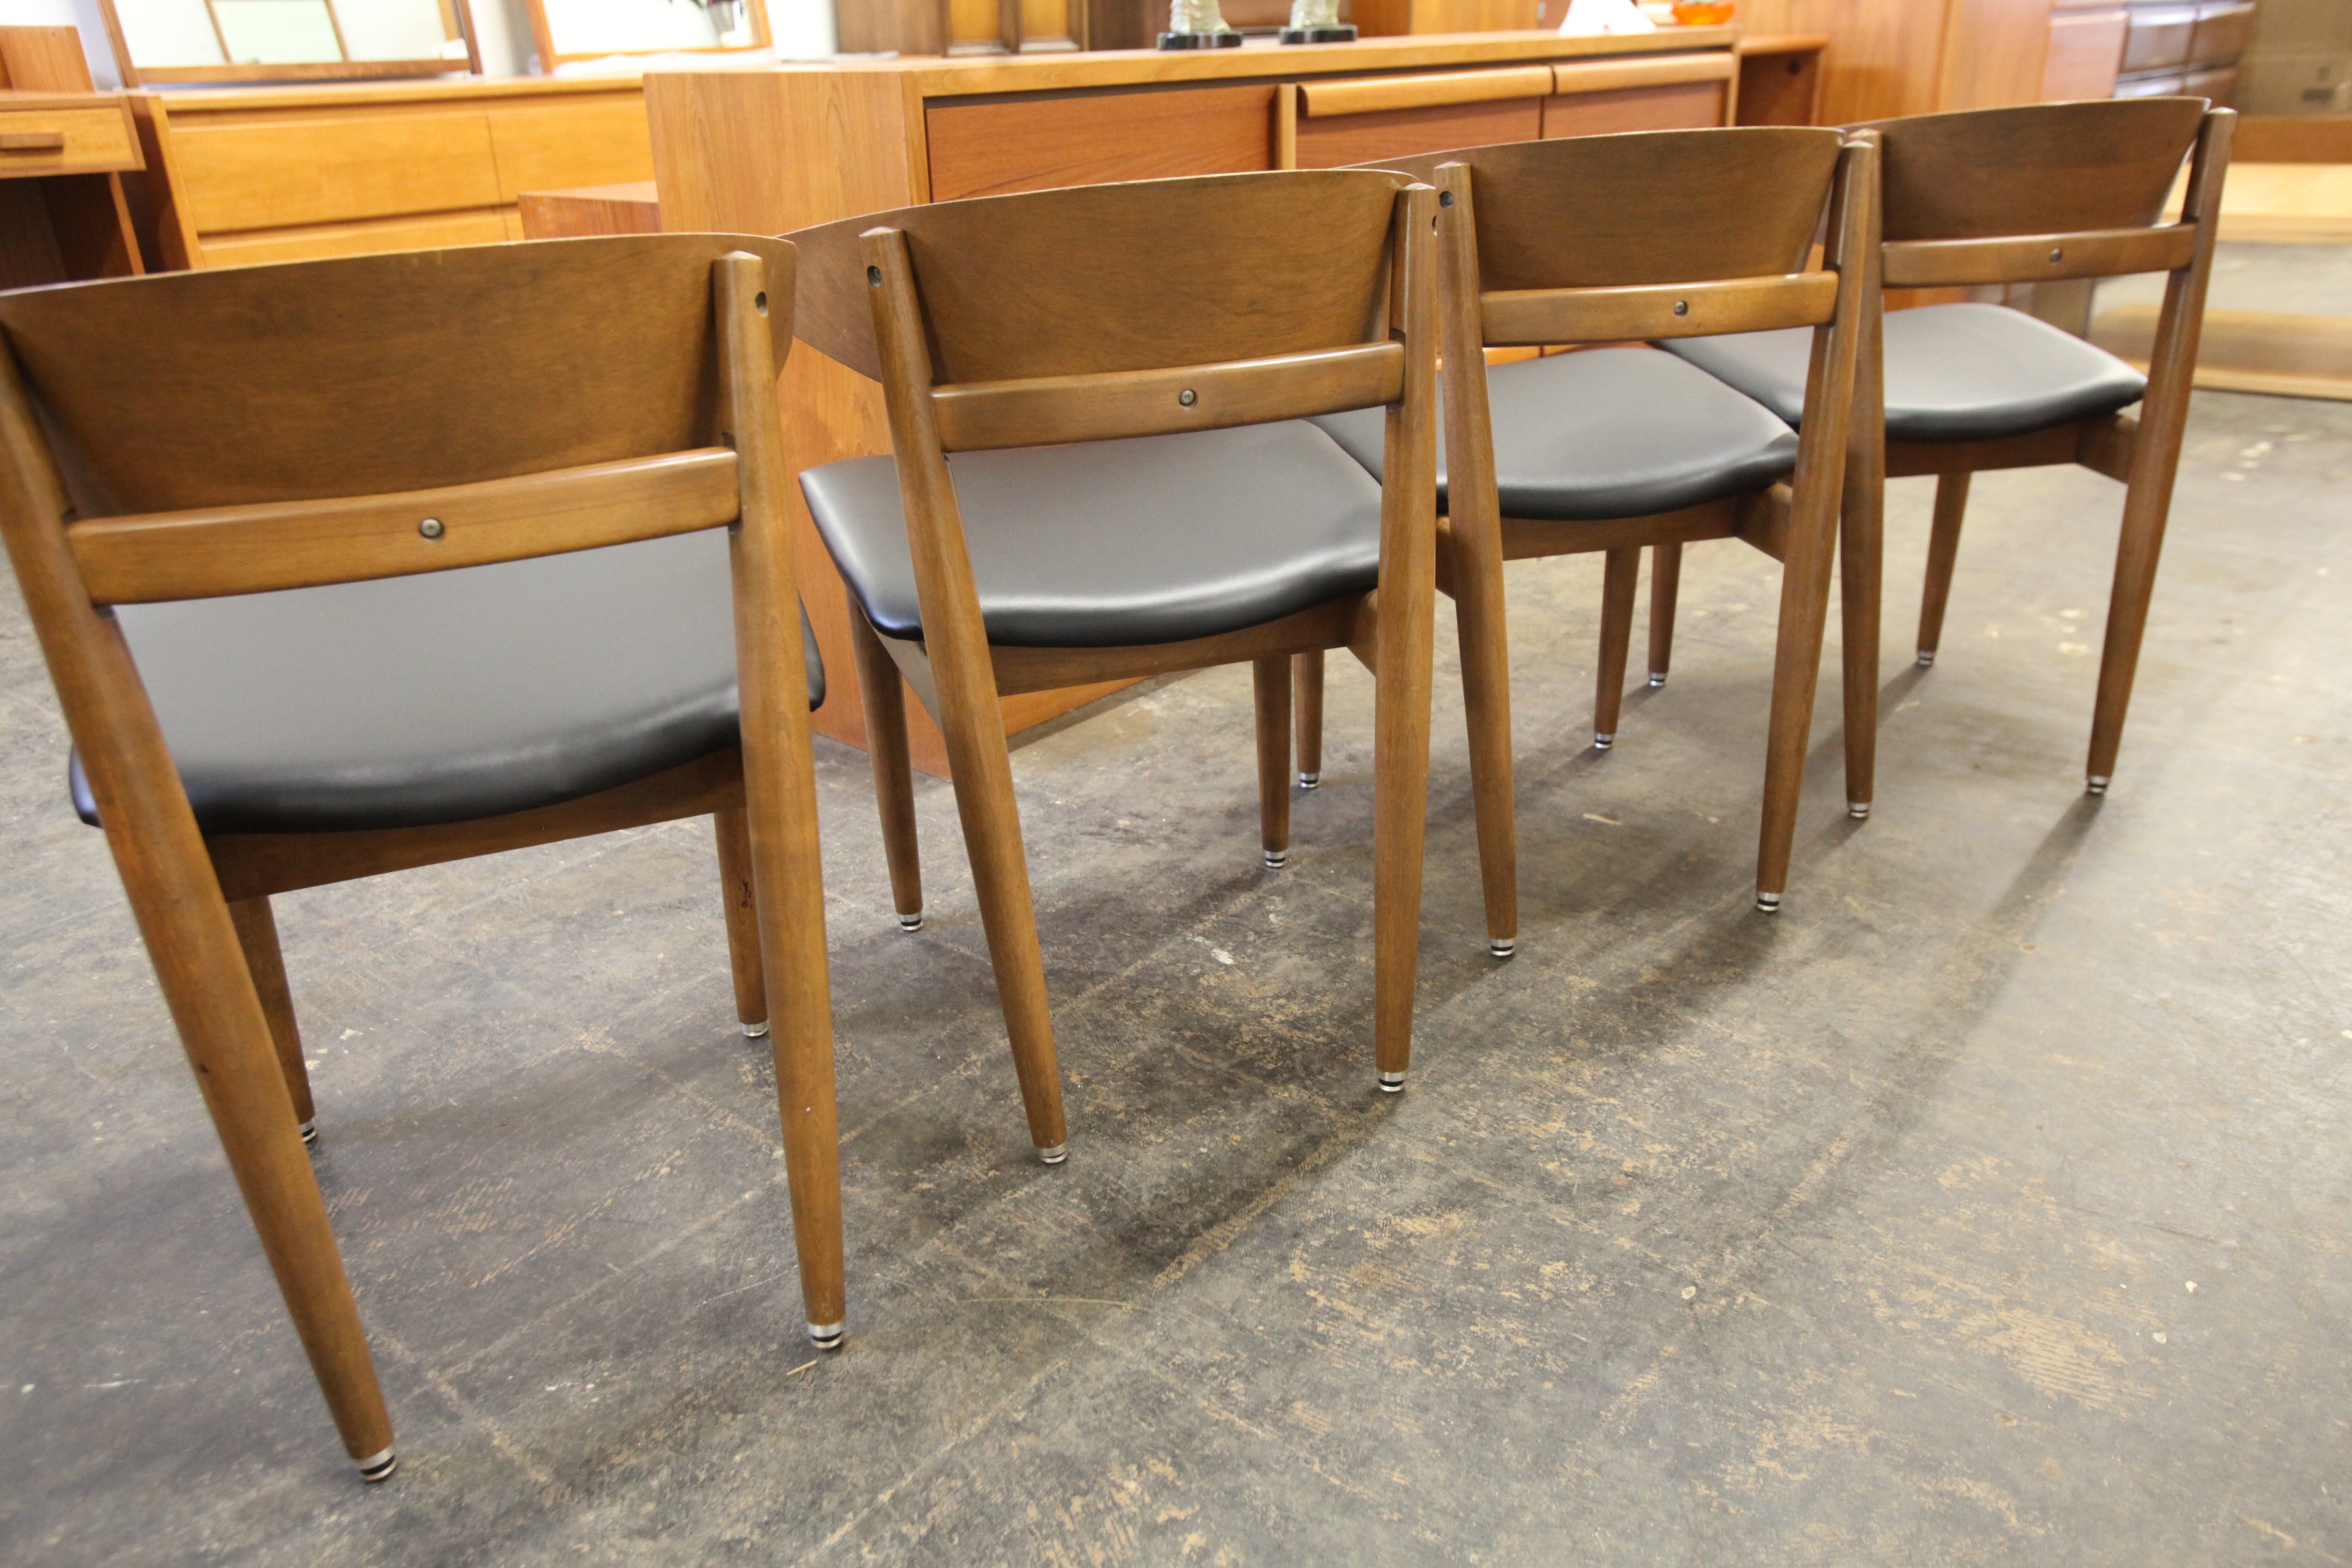 Set of 4 Vintage Walnut Chairs by Imperial  (20.25"W x 19.5"D x 28"H)